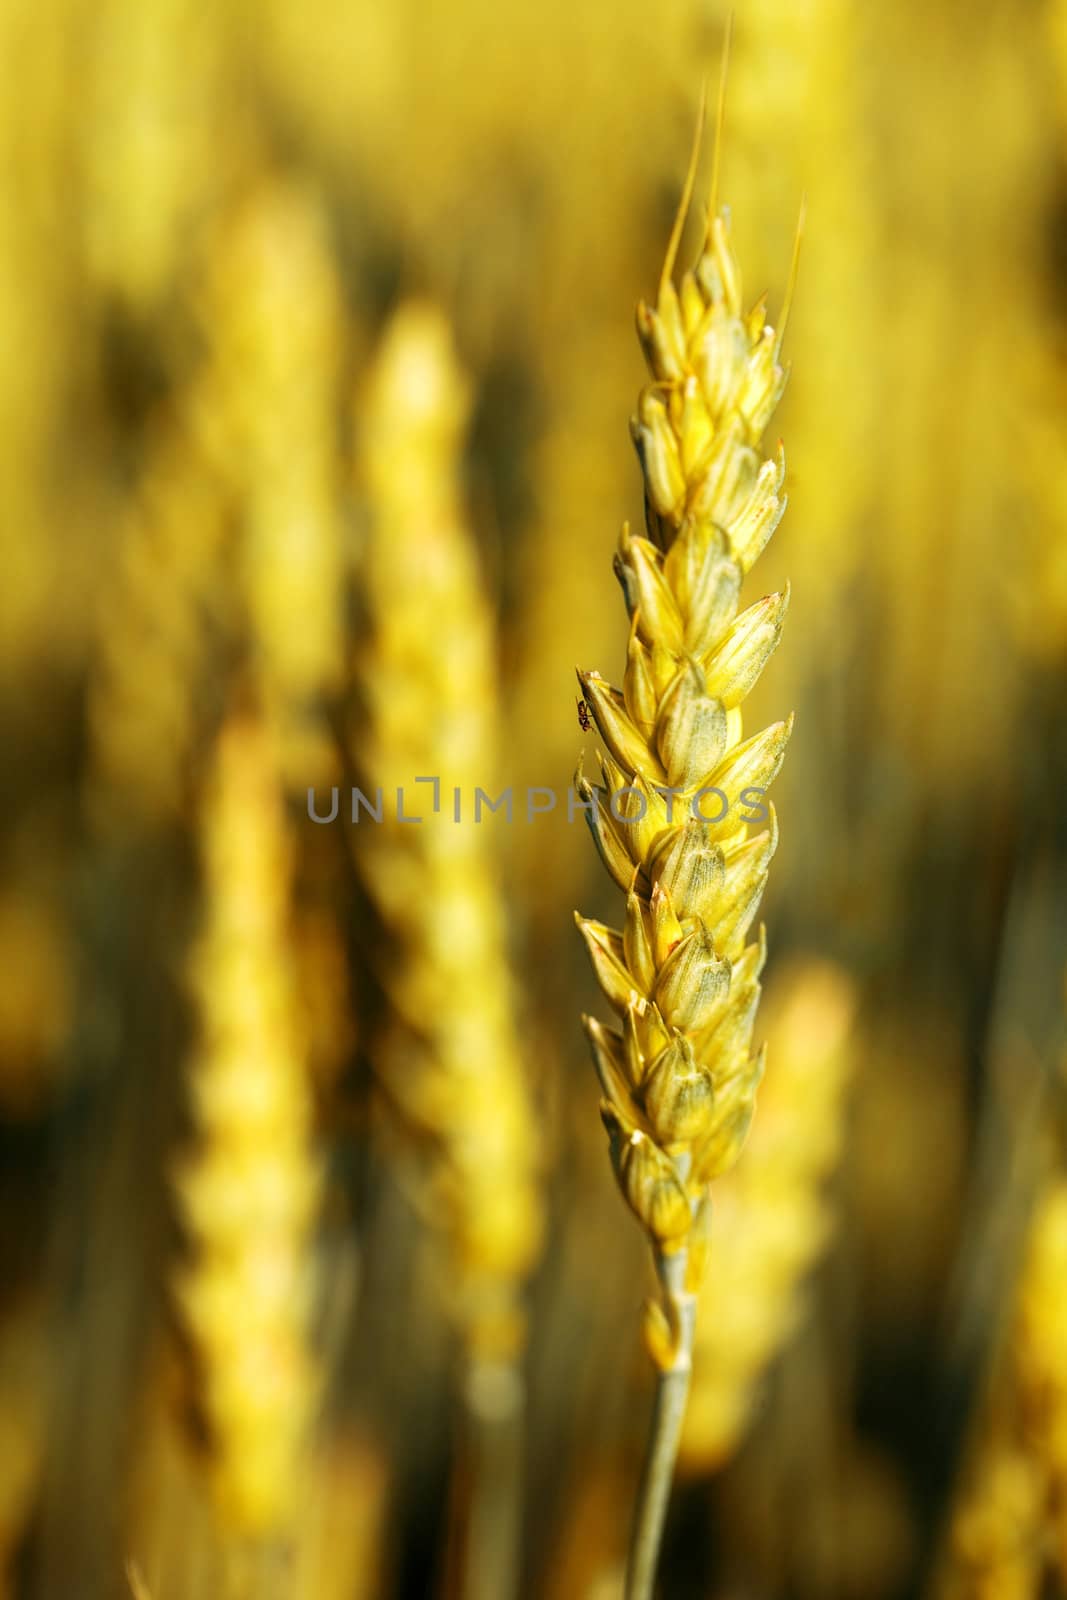 Agriculture theme: an image of wheat ear